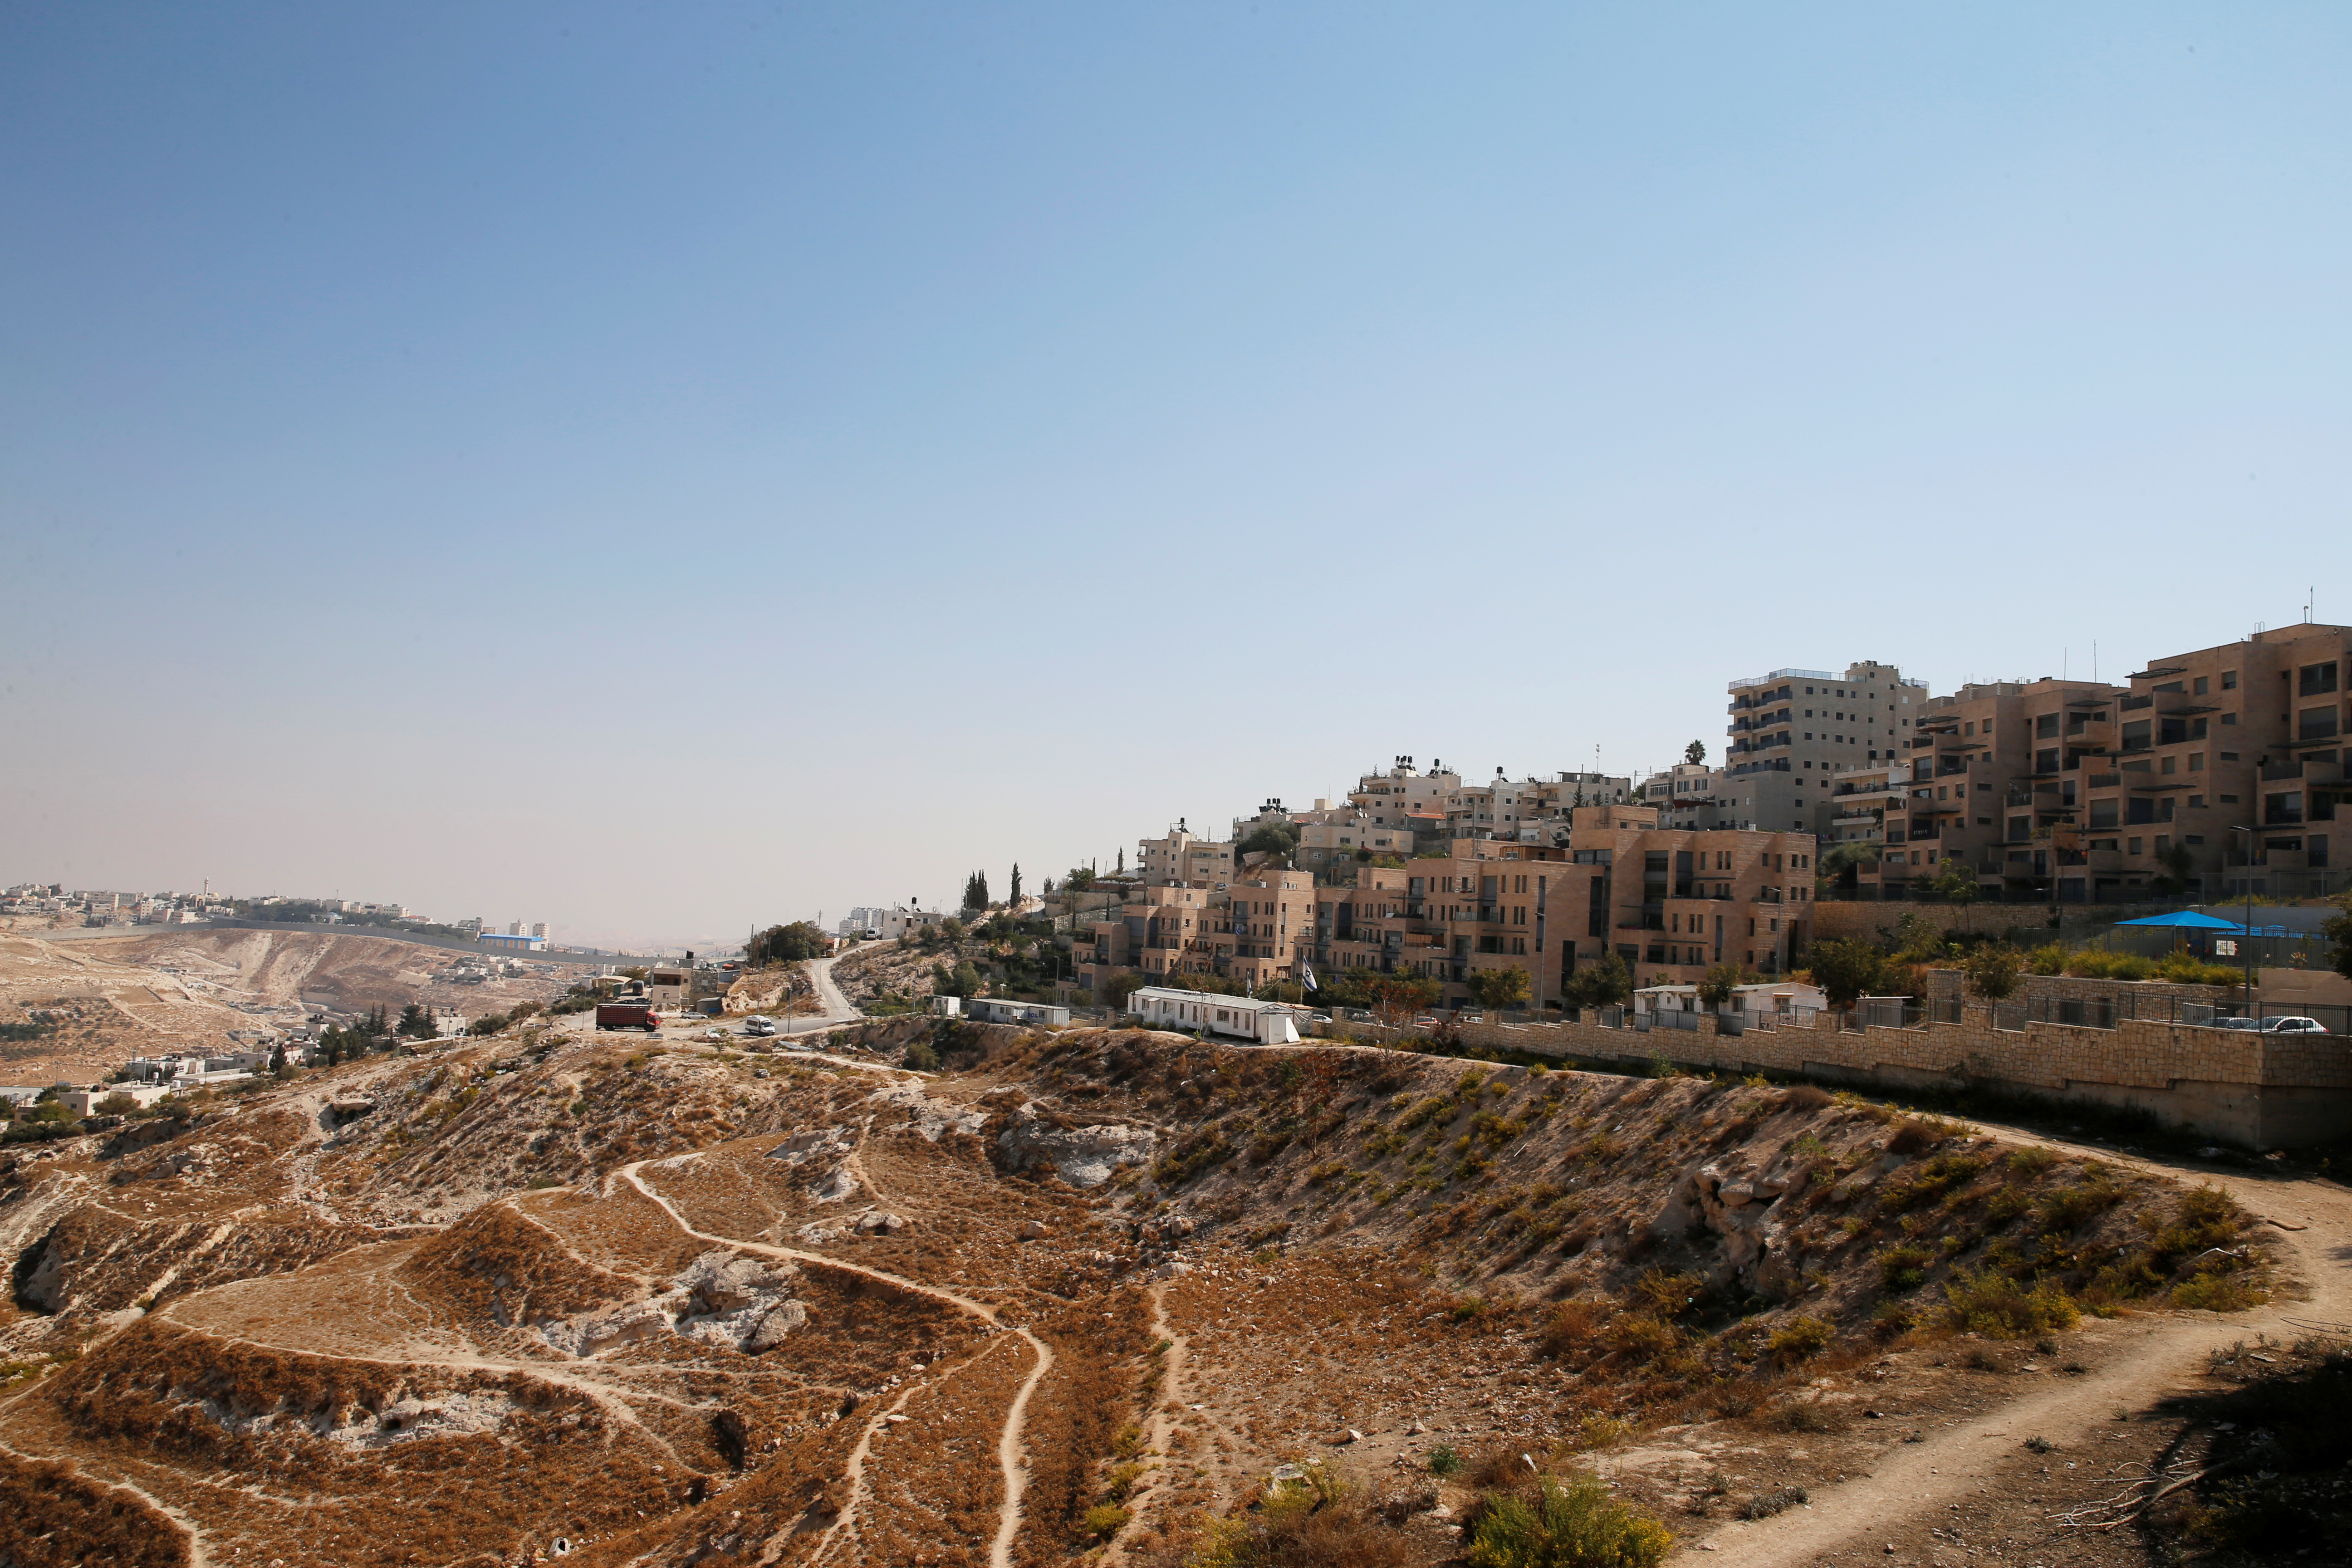 A general view shows the Jewish settler enclave of Nof Zion located in the heart of the Palestinian neighborhood of Jabel Mukaber, in East Jerusalem